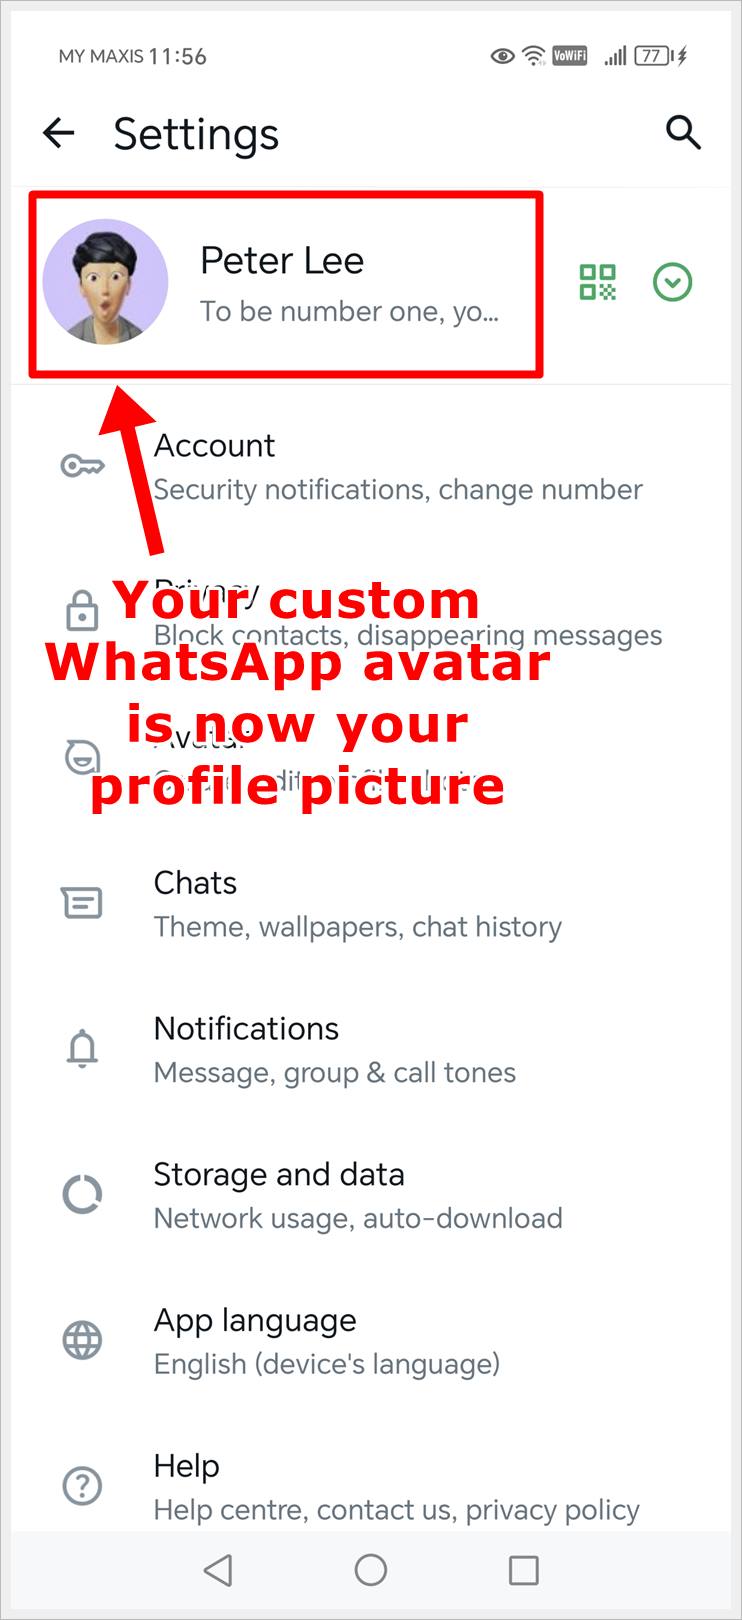 Image shows the custom avatar has been used as the WhatsApp profile picture.